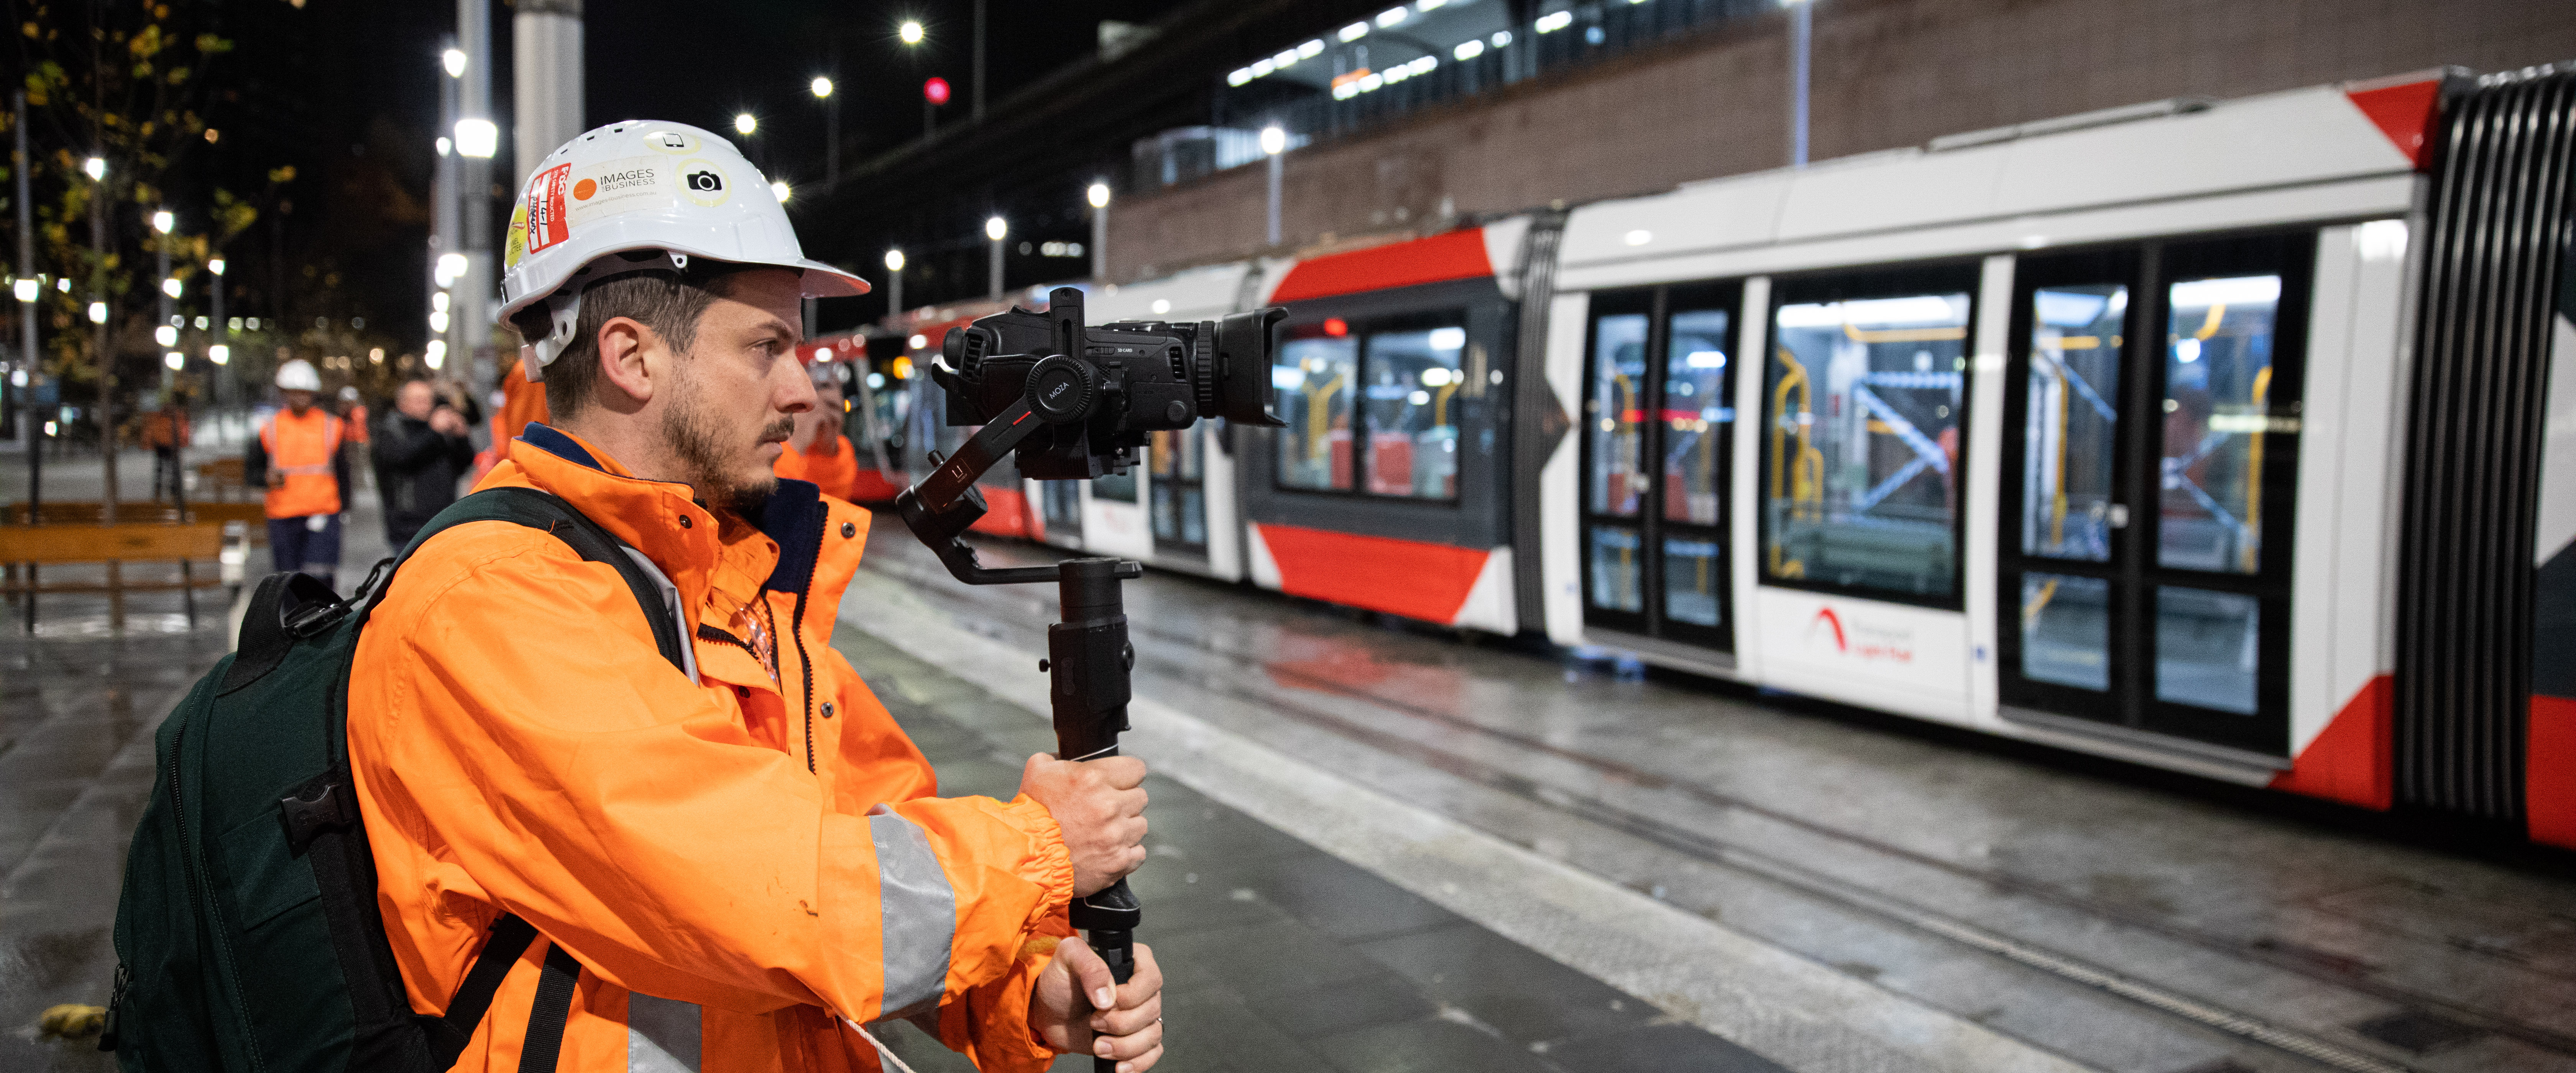 Toby Sain of Images for Business shoots video images for the Sydney Light Rail.